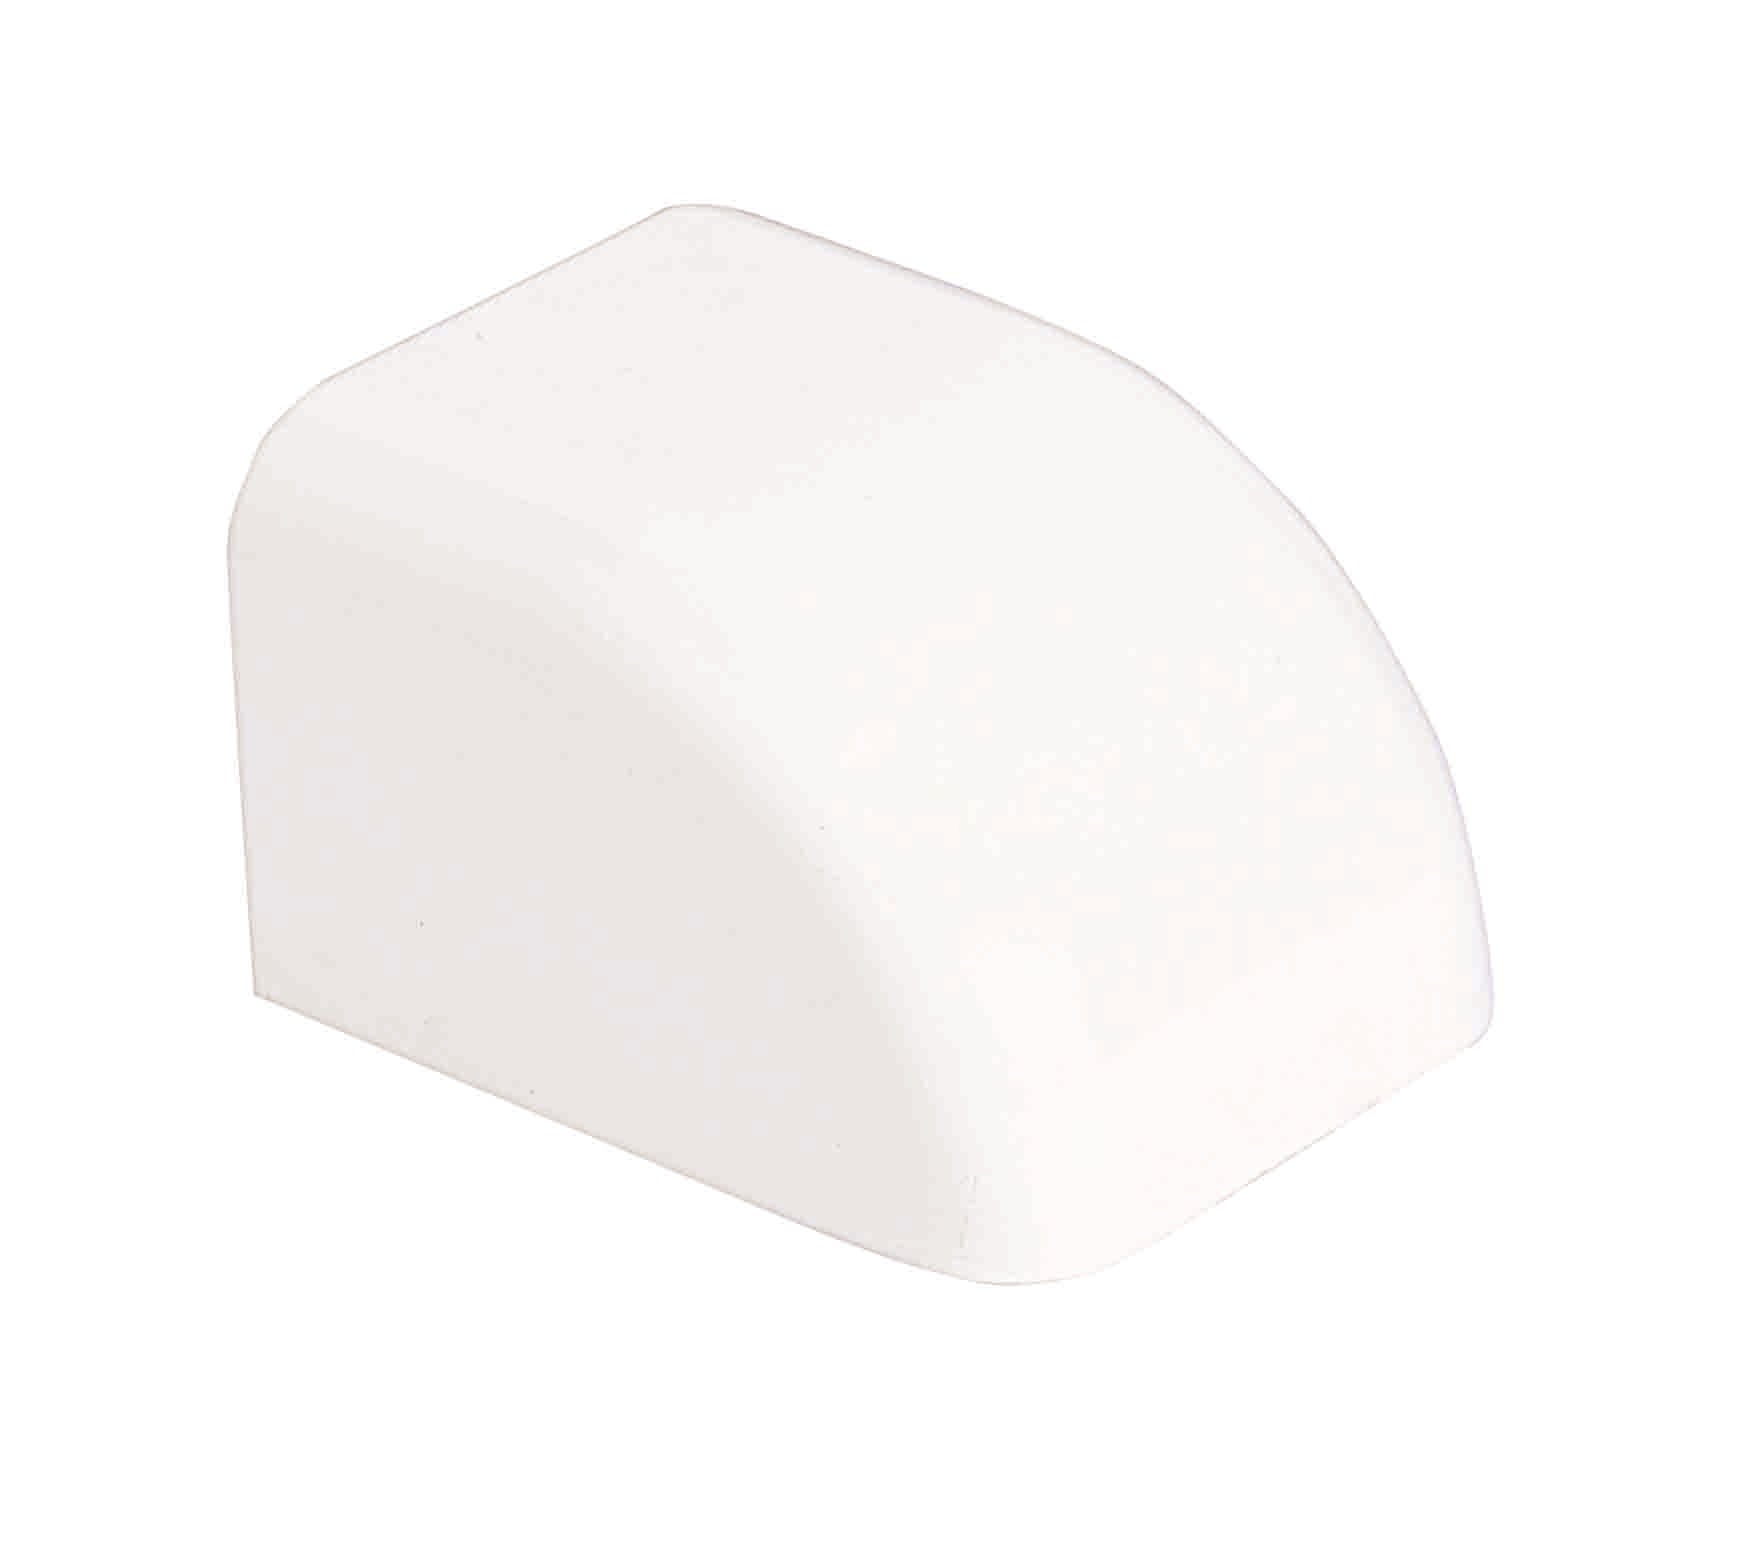 TAPON FINAL CANAL CLIMA 35X30MM BLANCO